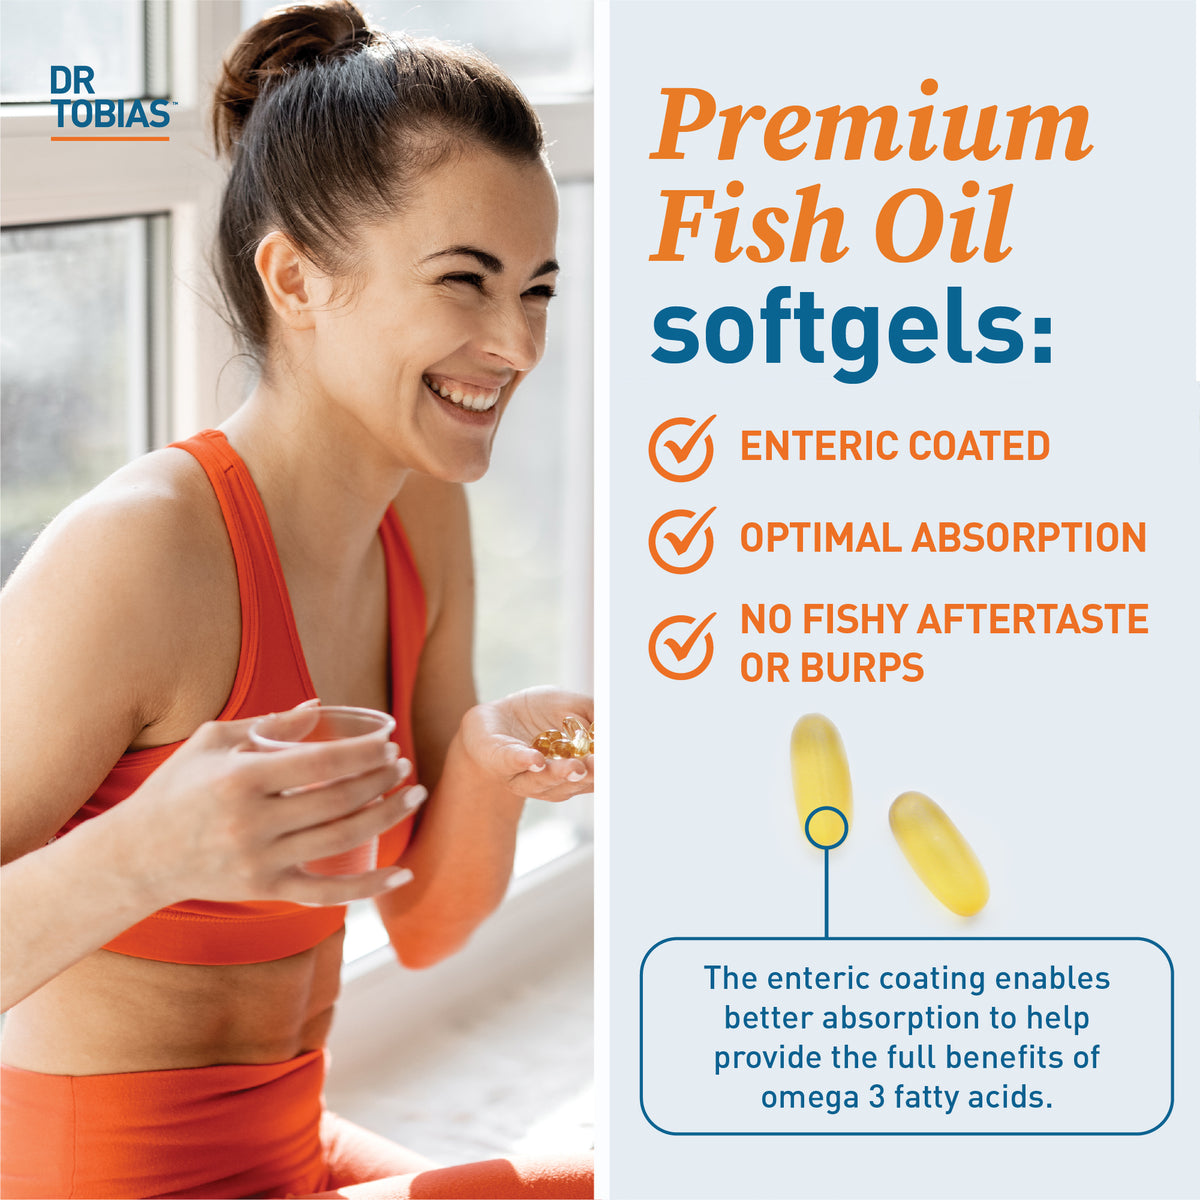 premium fish oil softgels have enteric coating, optimal absorption and no fishy after taste. 